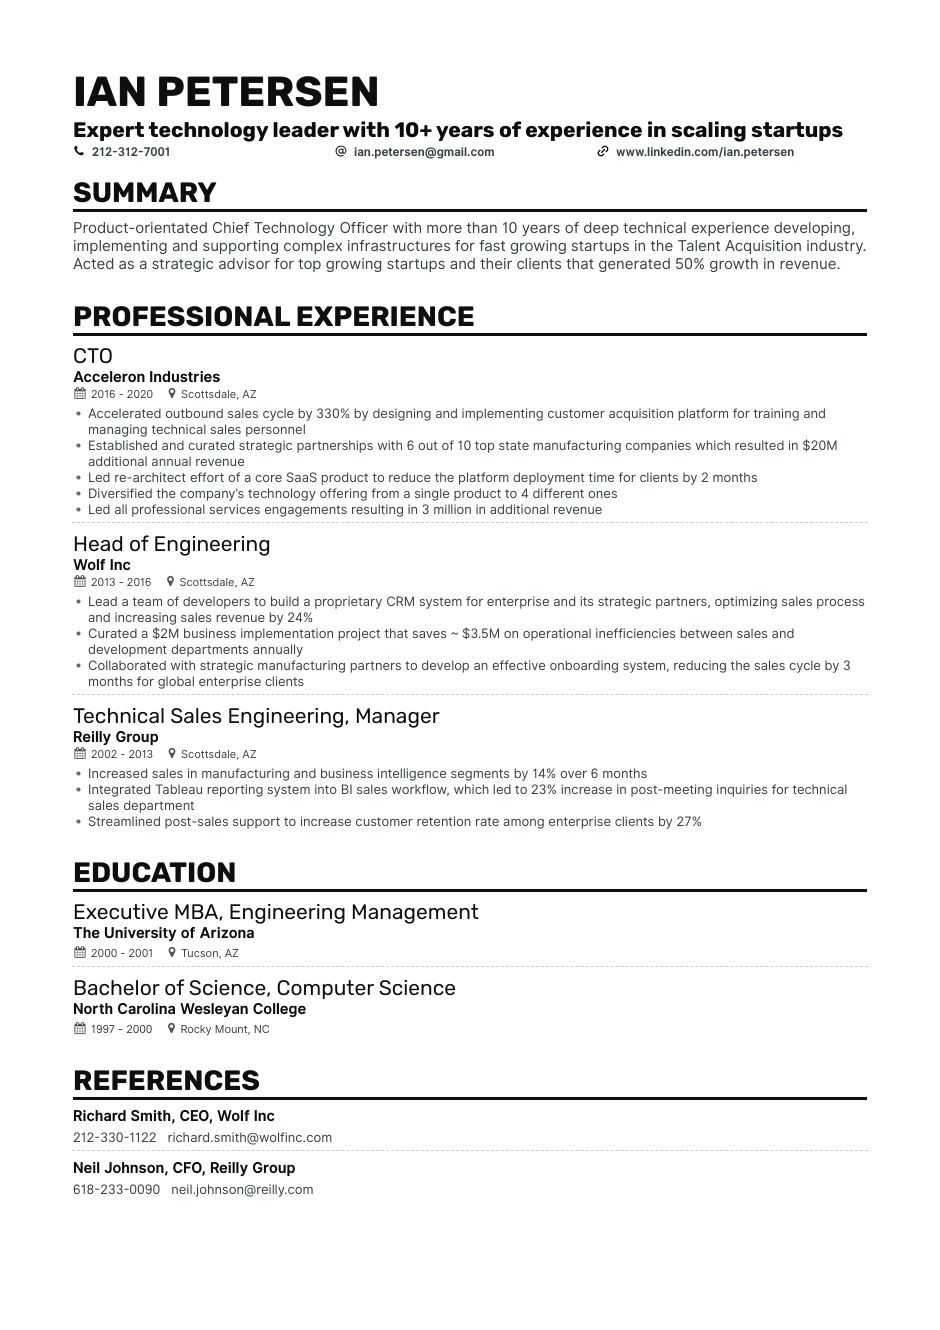 Sample Resume for software Engineer with 10 Years Experience 4 software Engineer Resume Examples and Writing Tips for 2021